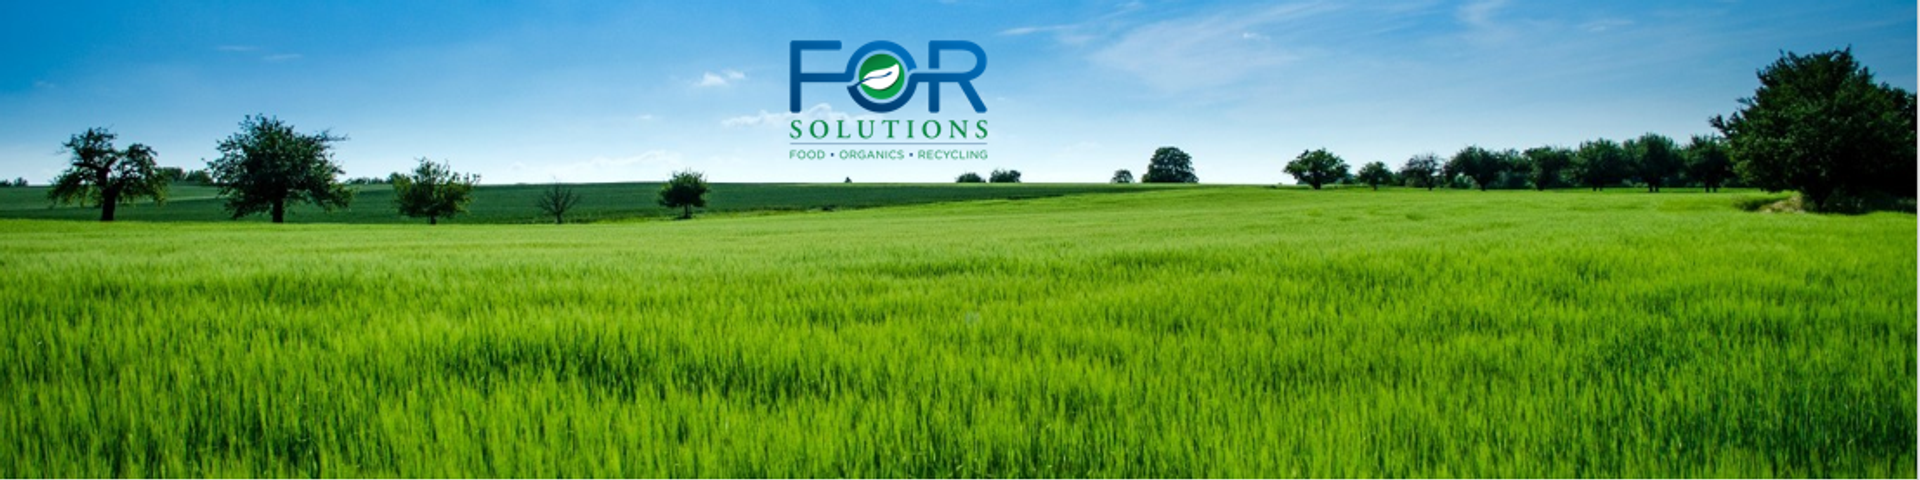 FOR Solutions, LLC